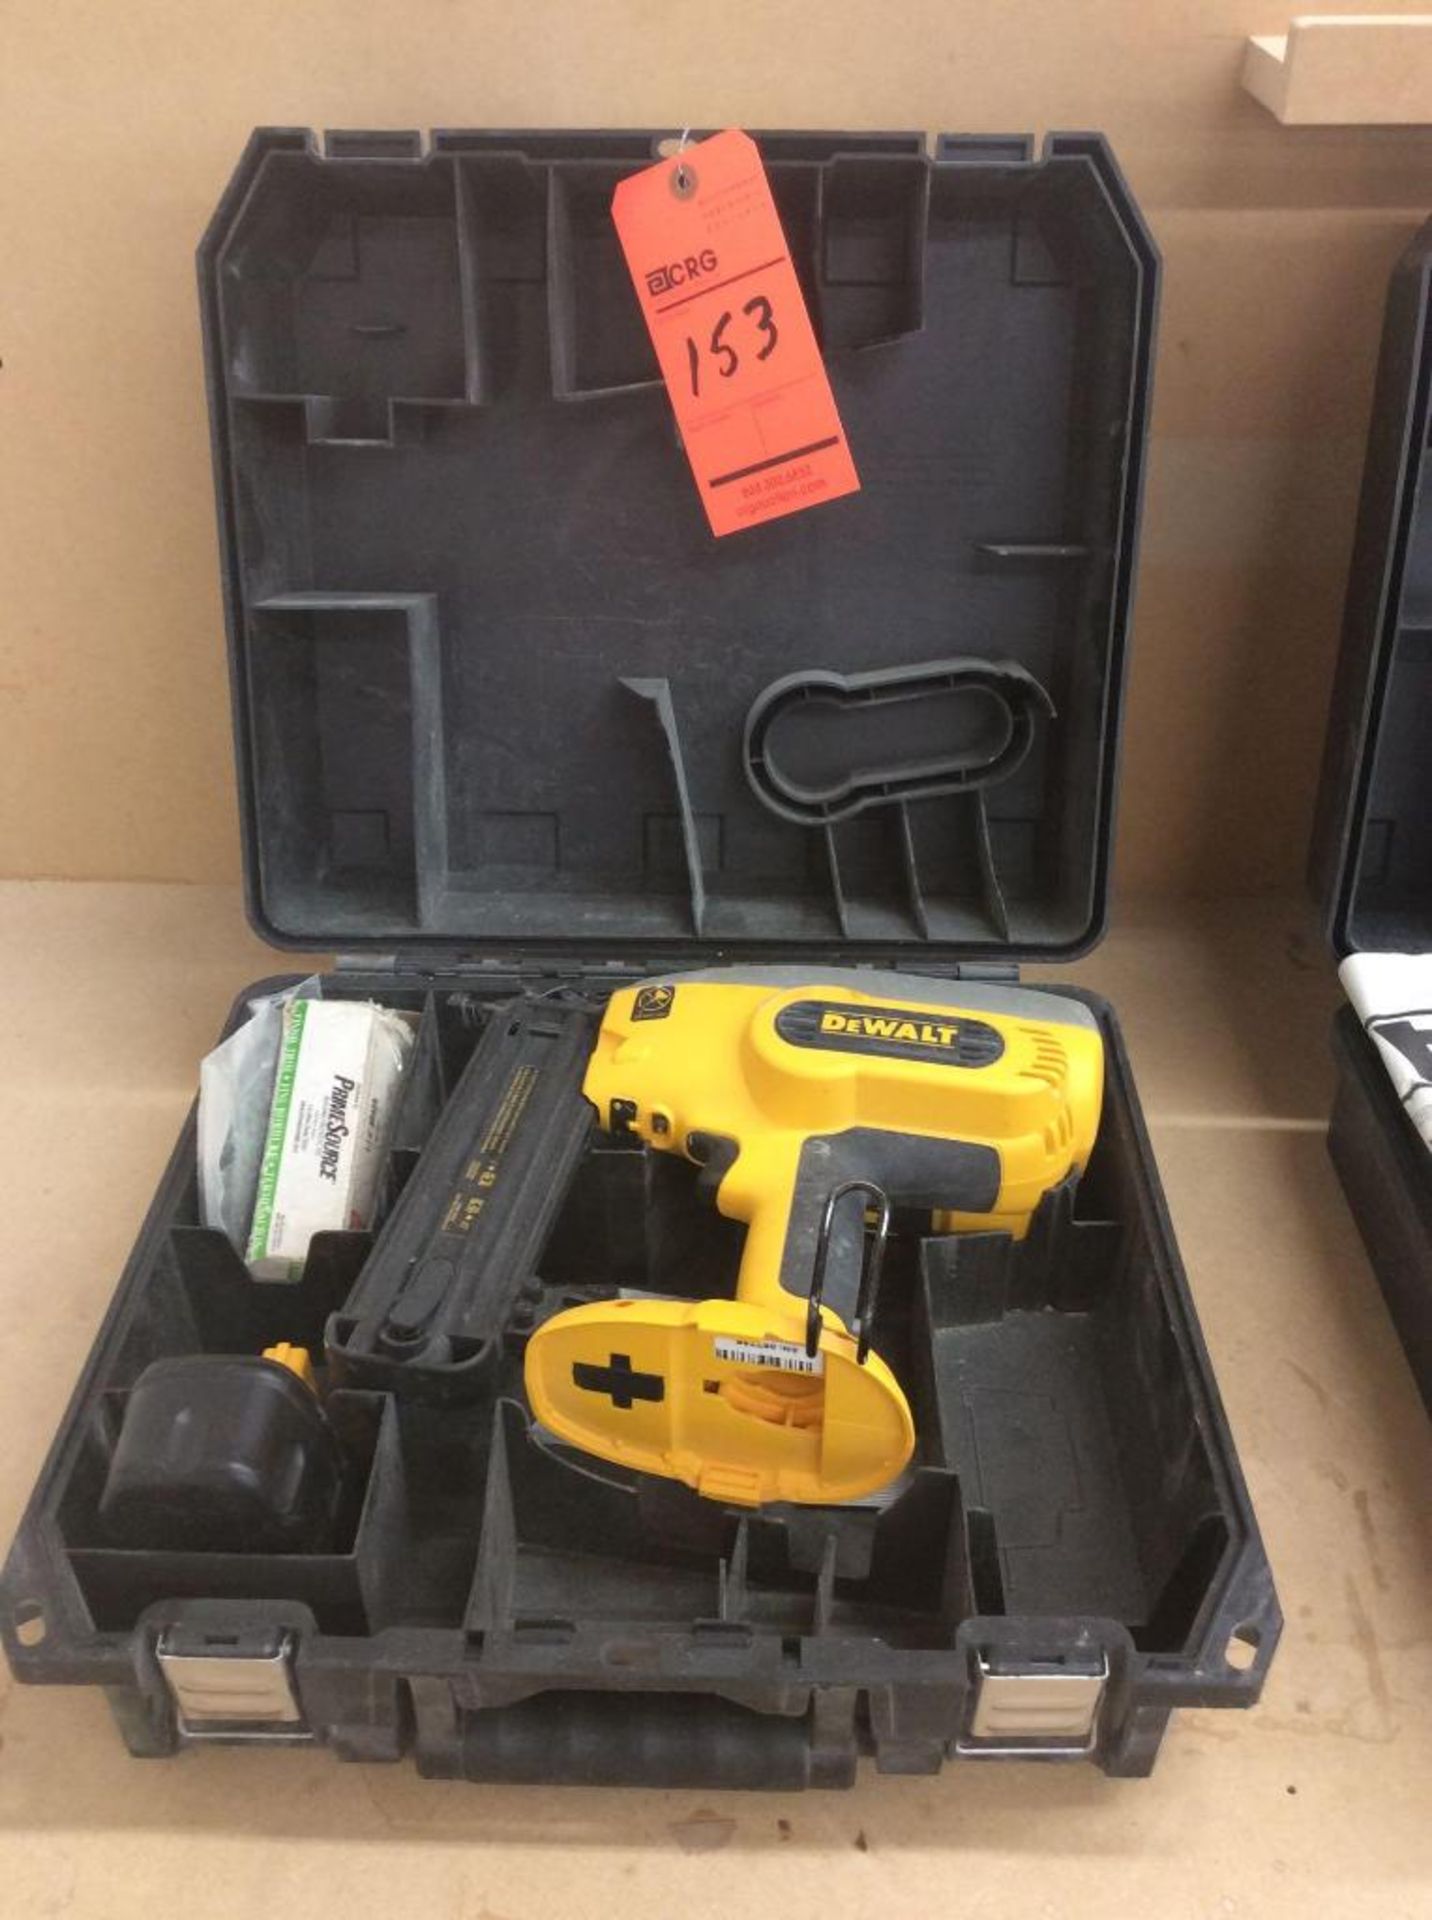 Dewalt cordless battery operated finish nailer, mn DC608 18 volt battery with case (NO CHARGER)